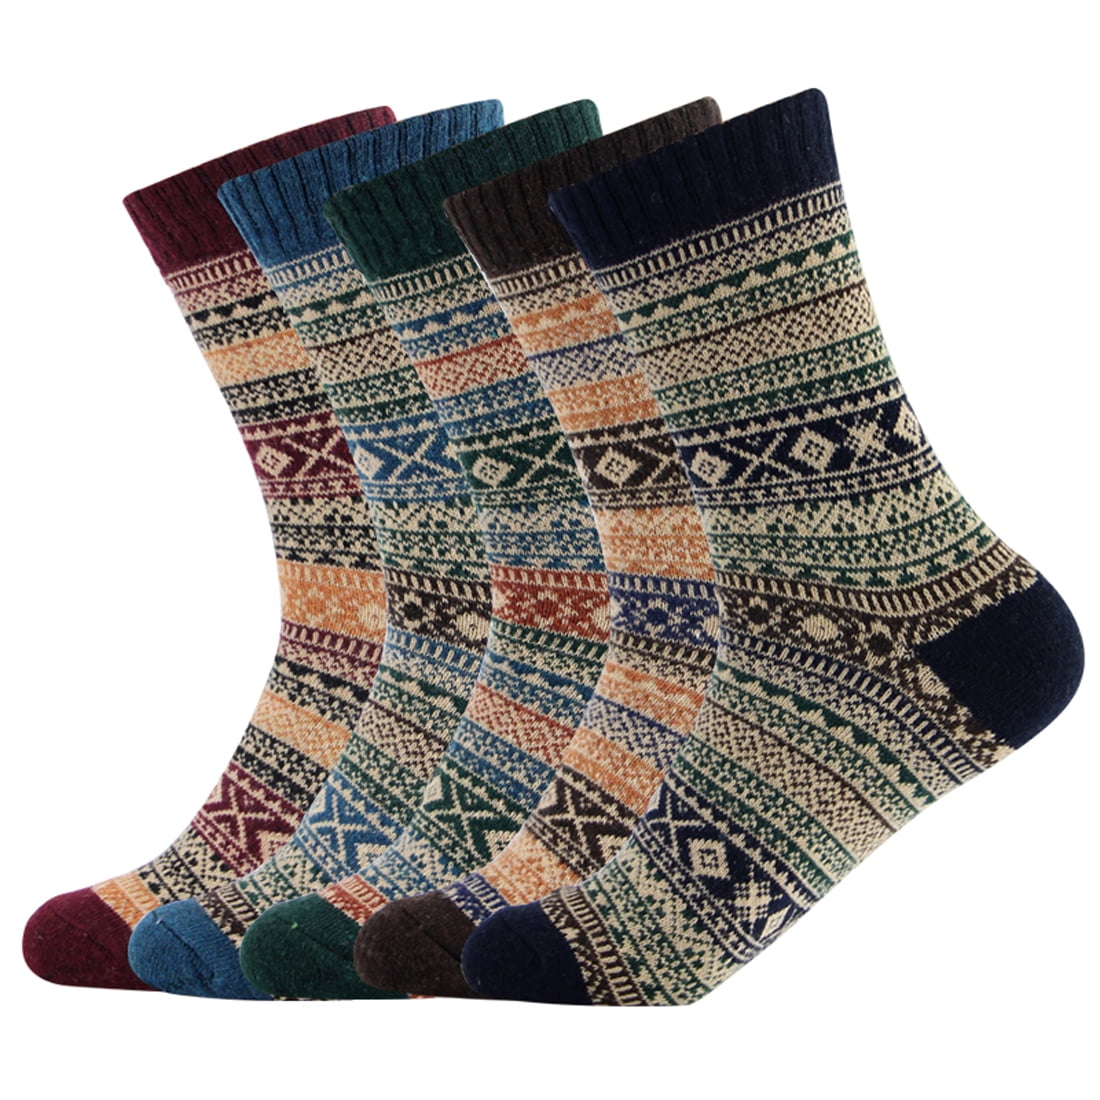 Johnature 5 Pairs Thick Vintage Socks/Knitted Socks/Christmas Socks/Xmas Socks/Winter Socks/Warmers Socks/Thick Wool Socks/Thicken Socks